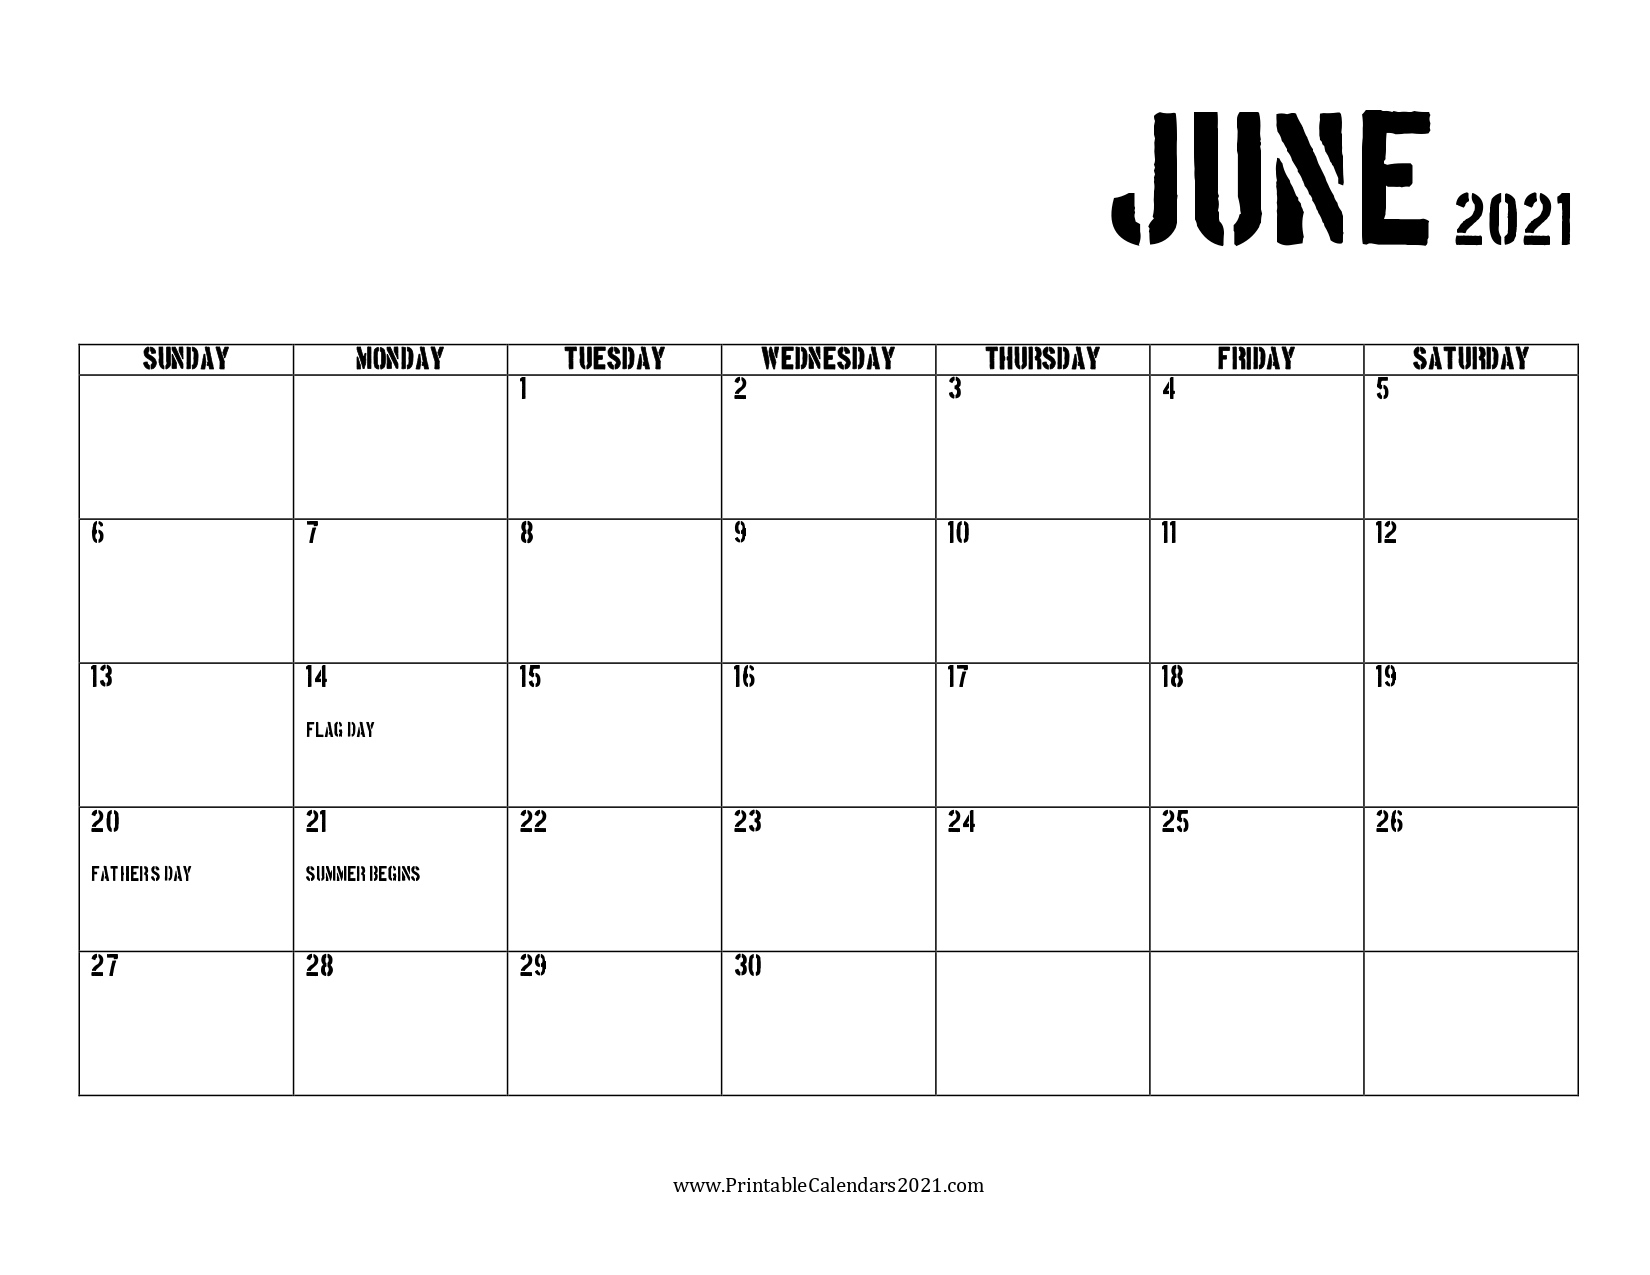 60+ Free June 2021 Calendar Printable With Holidays, Blank, Pdf June 2021 Calendar With Tithi